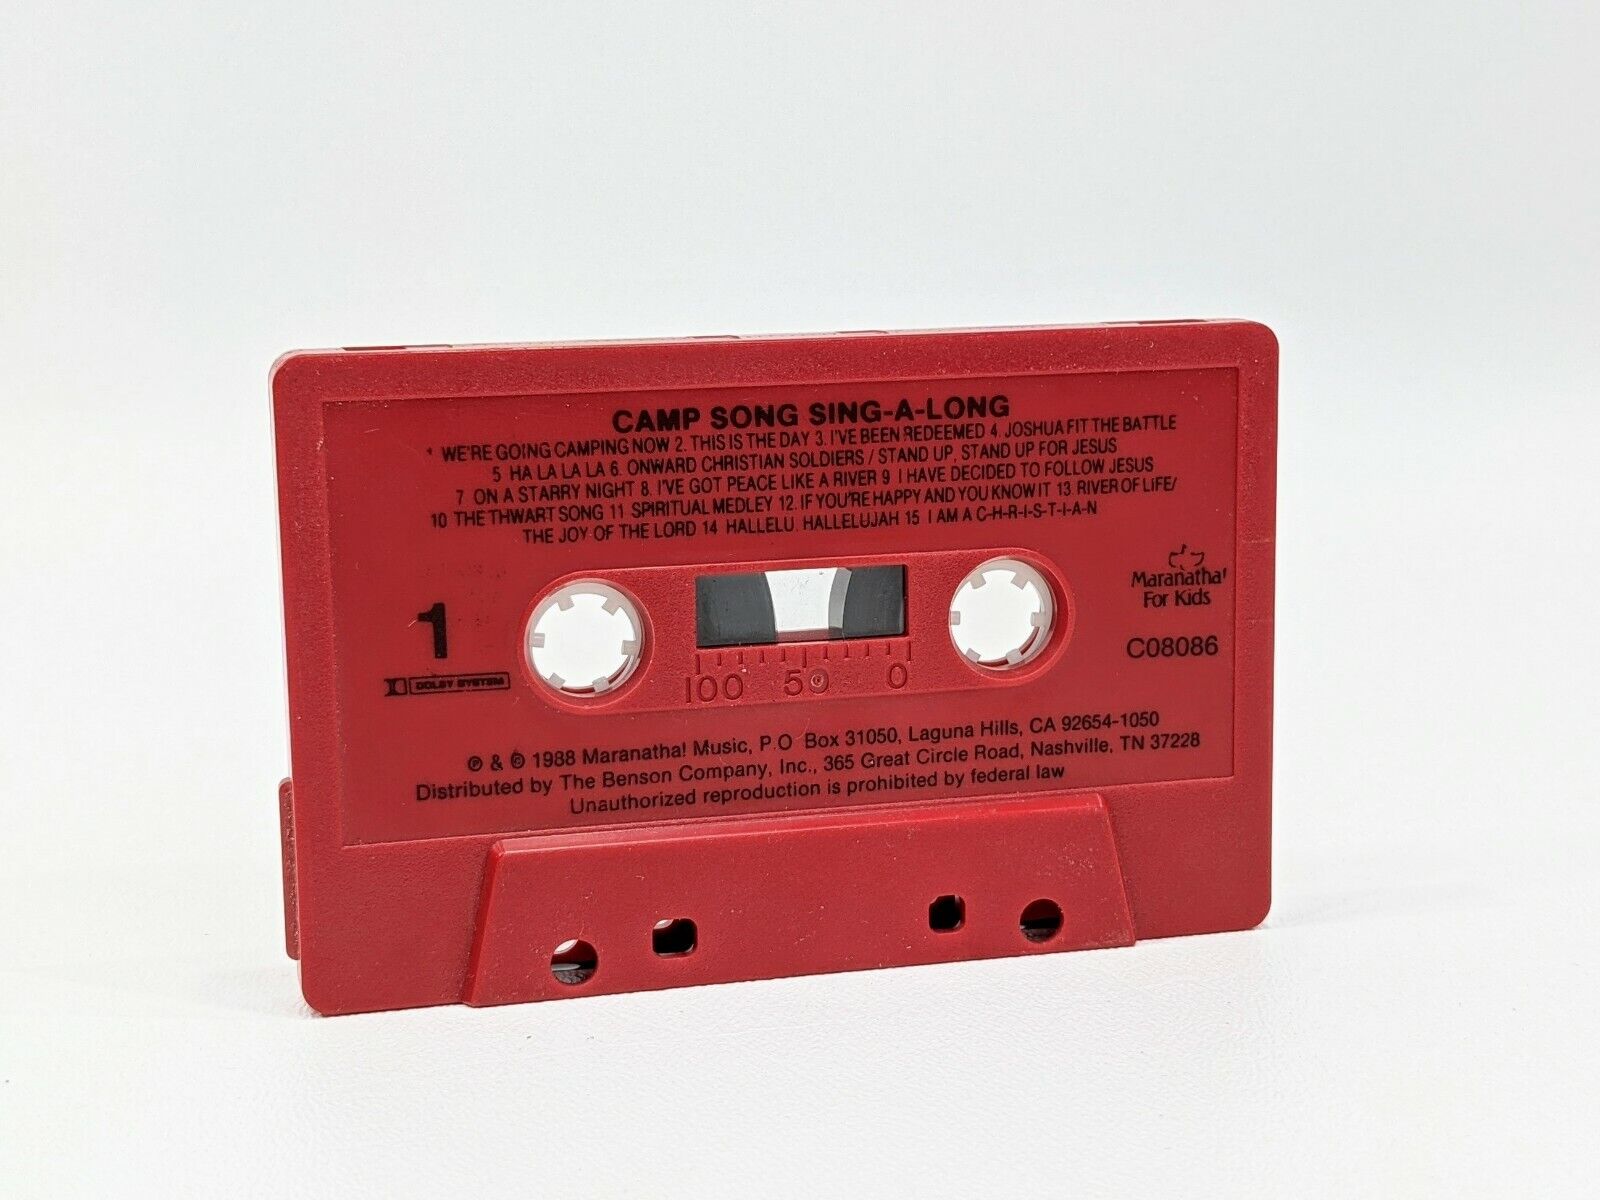 Camp songs sing-a-long audio cassette 1988